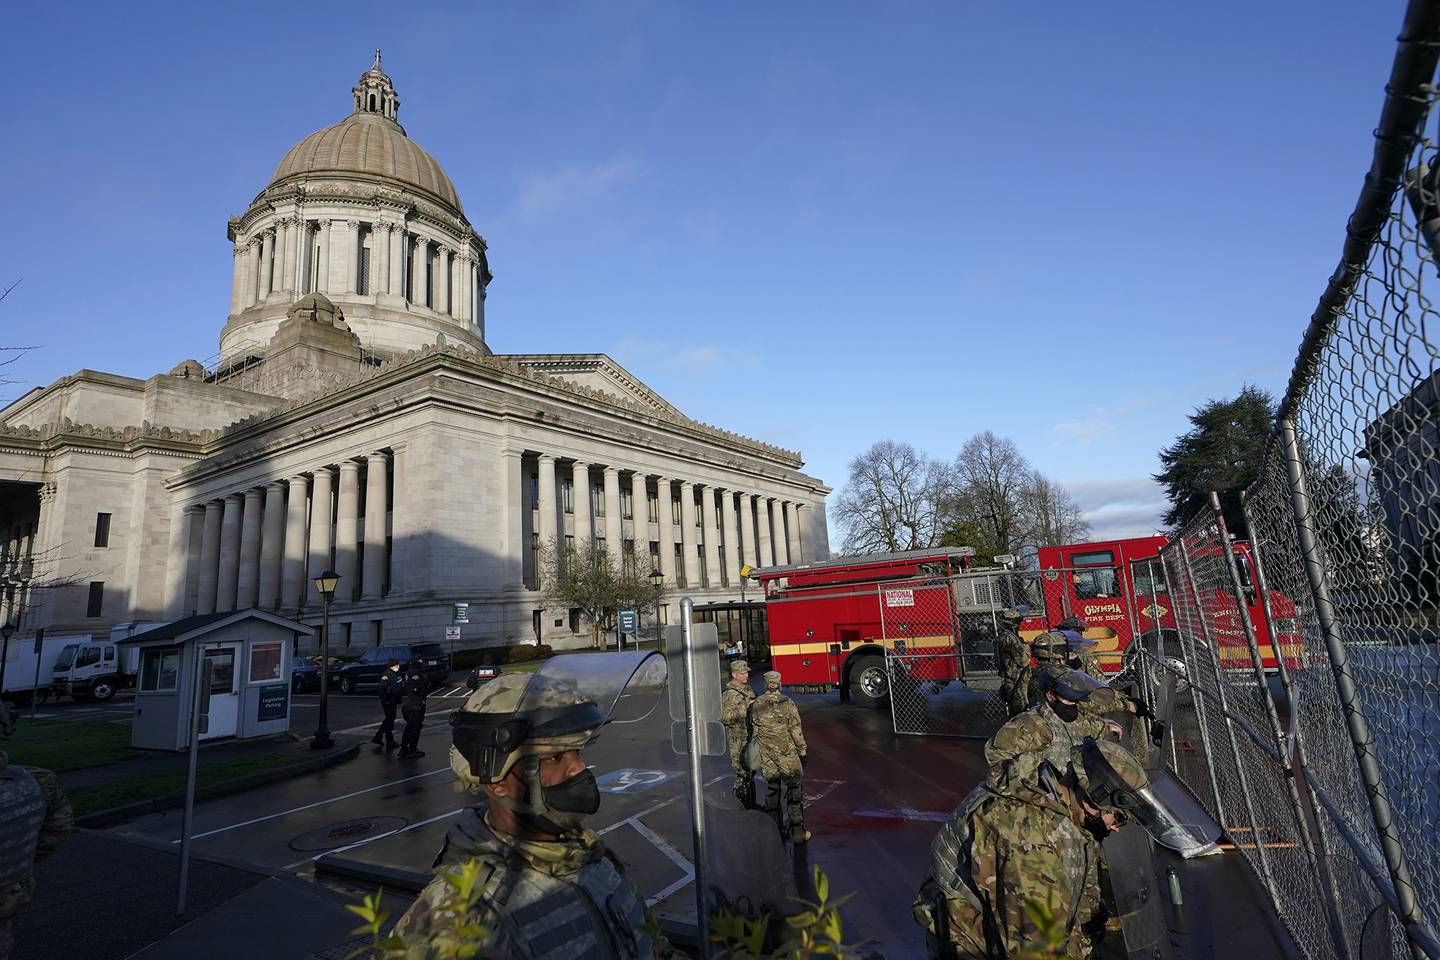 Members of the Washington National Guard stand along a perimeter fence as an Olympia Fire Dept. truck passes by, Sunday, Jan. 10, 2021, at the Capitol in Olympia, Wash.